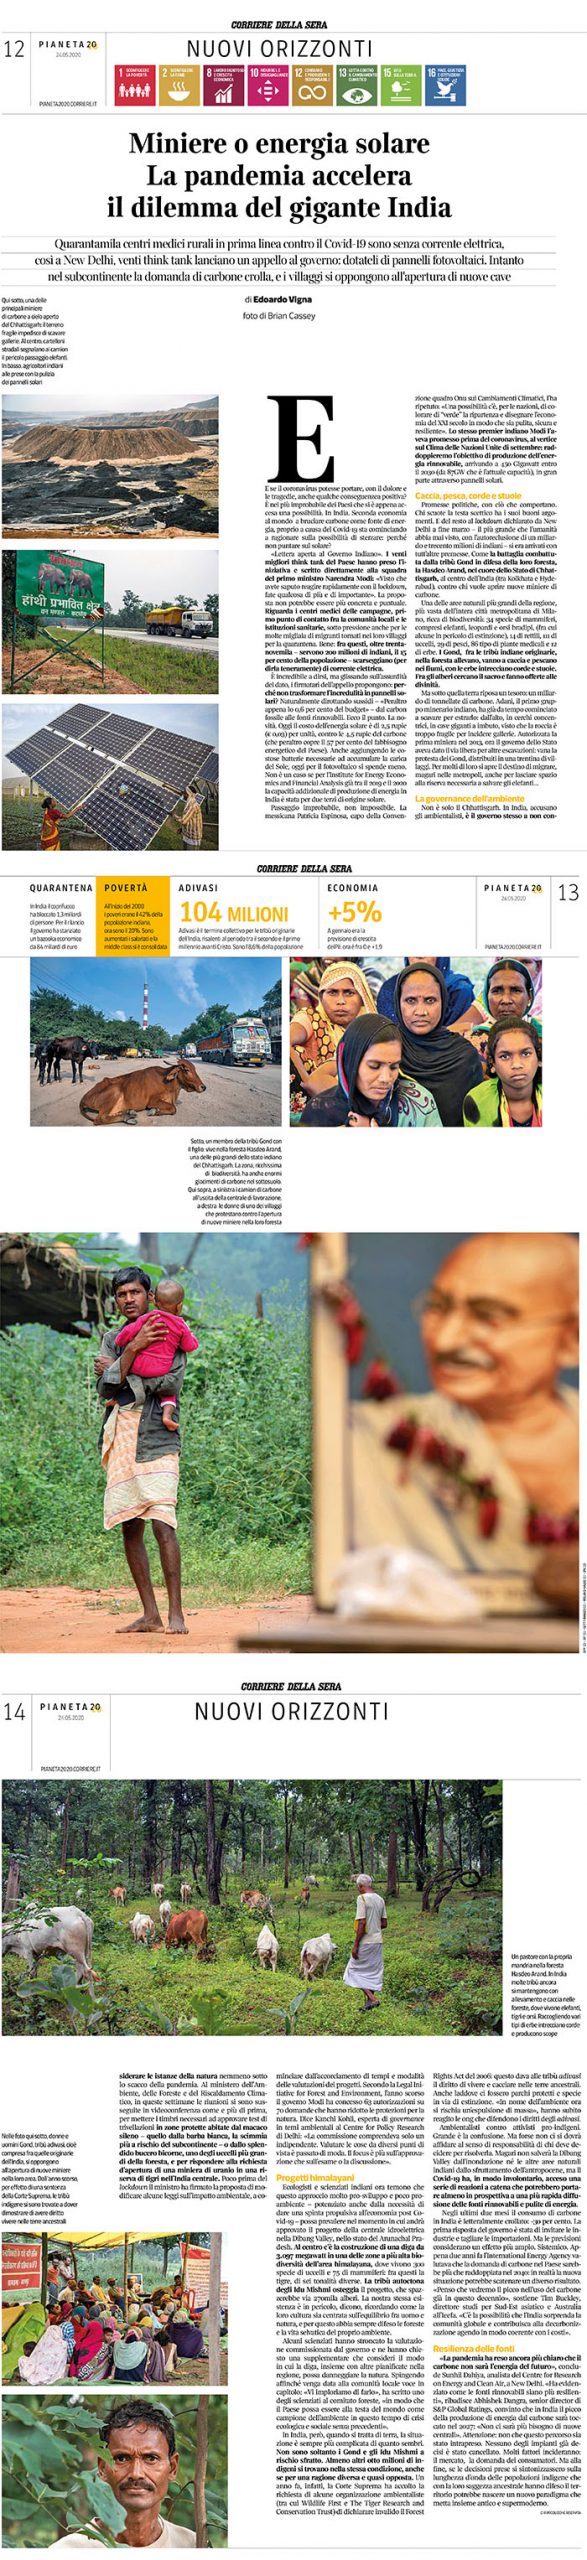 Corriere Della Sera - Adani, Gond Peoples and Hasdeo Arand Forest story - images by Brian Cassey